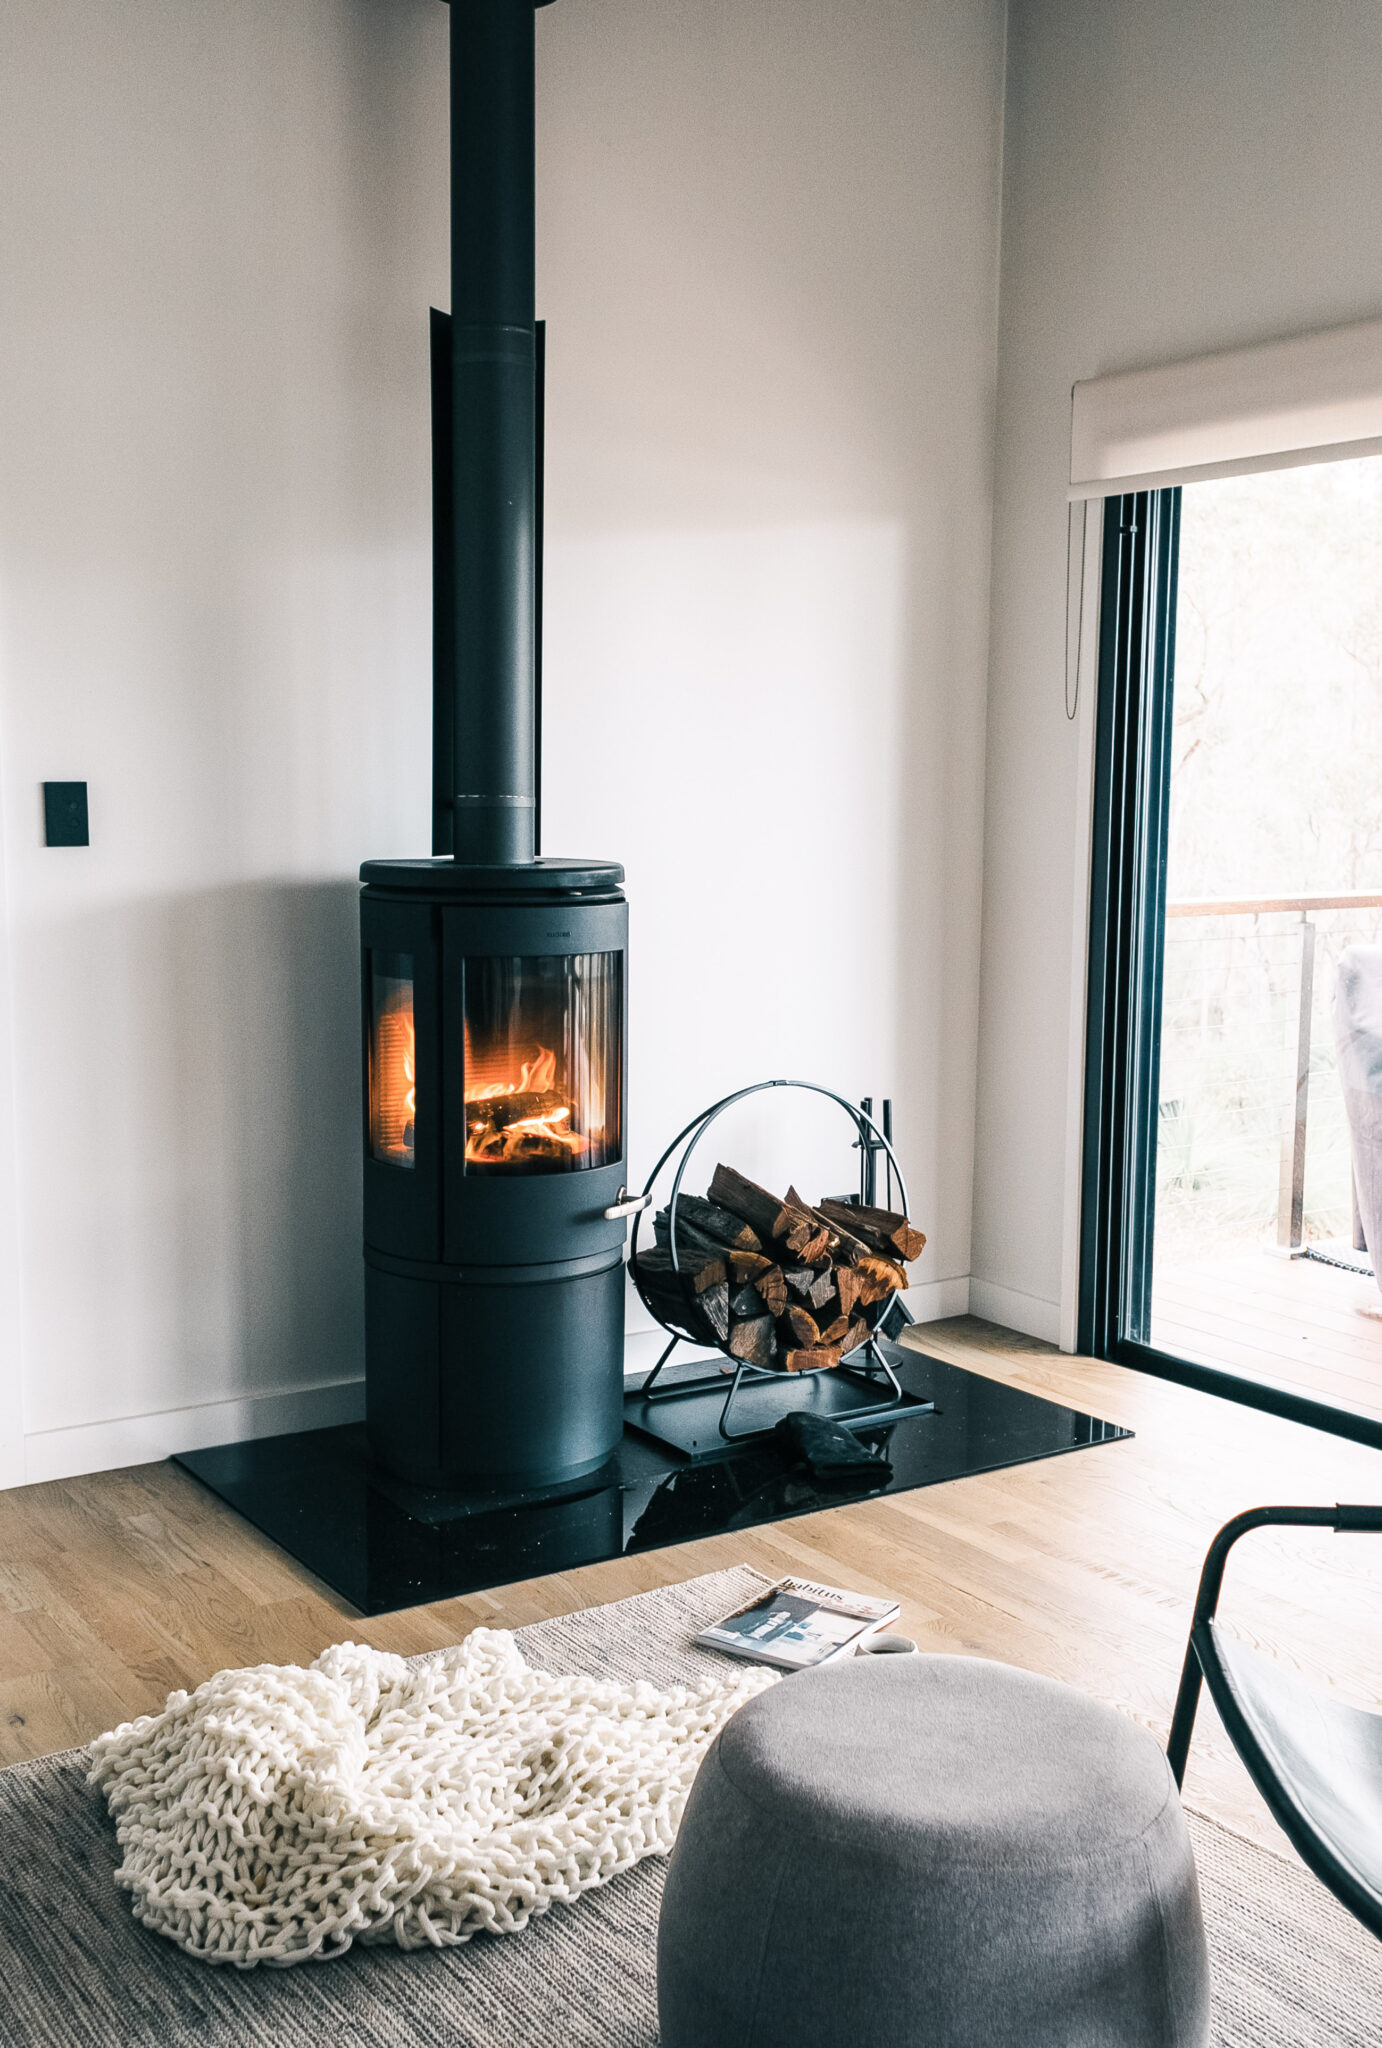 A beautiful living room is shown, it's cozy with a fireplace and plenty of blankets and a rug. This article covers 3 cost-effective ways to combat the cold this winter.